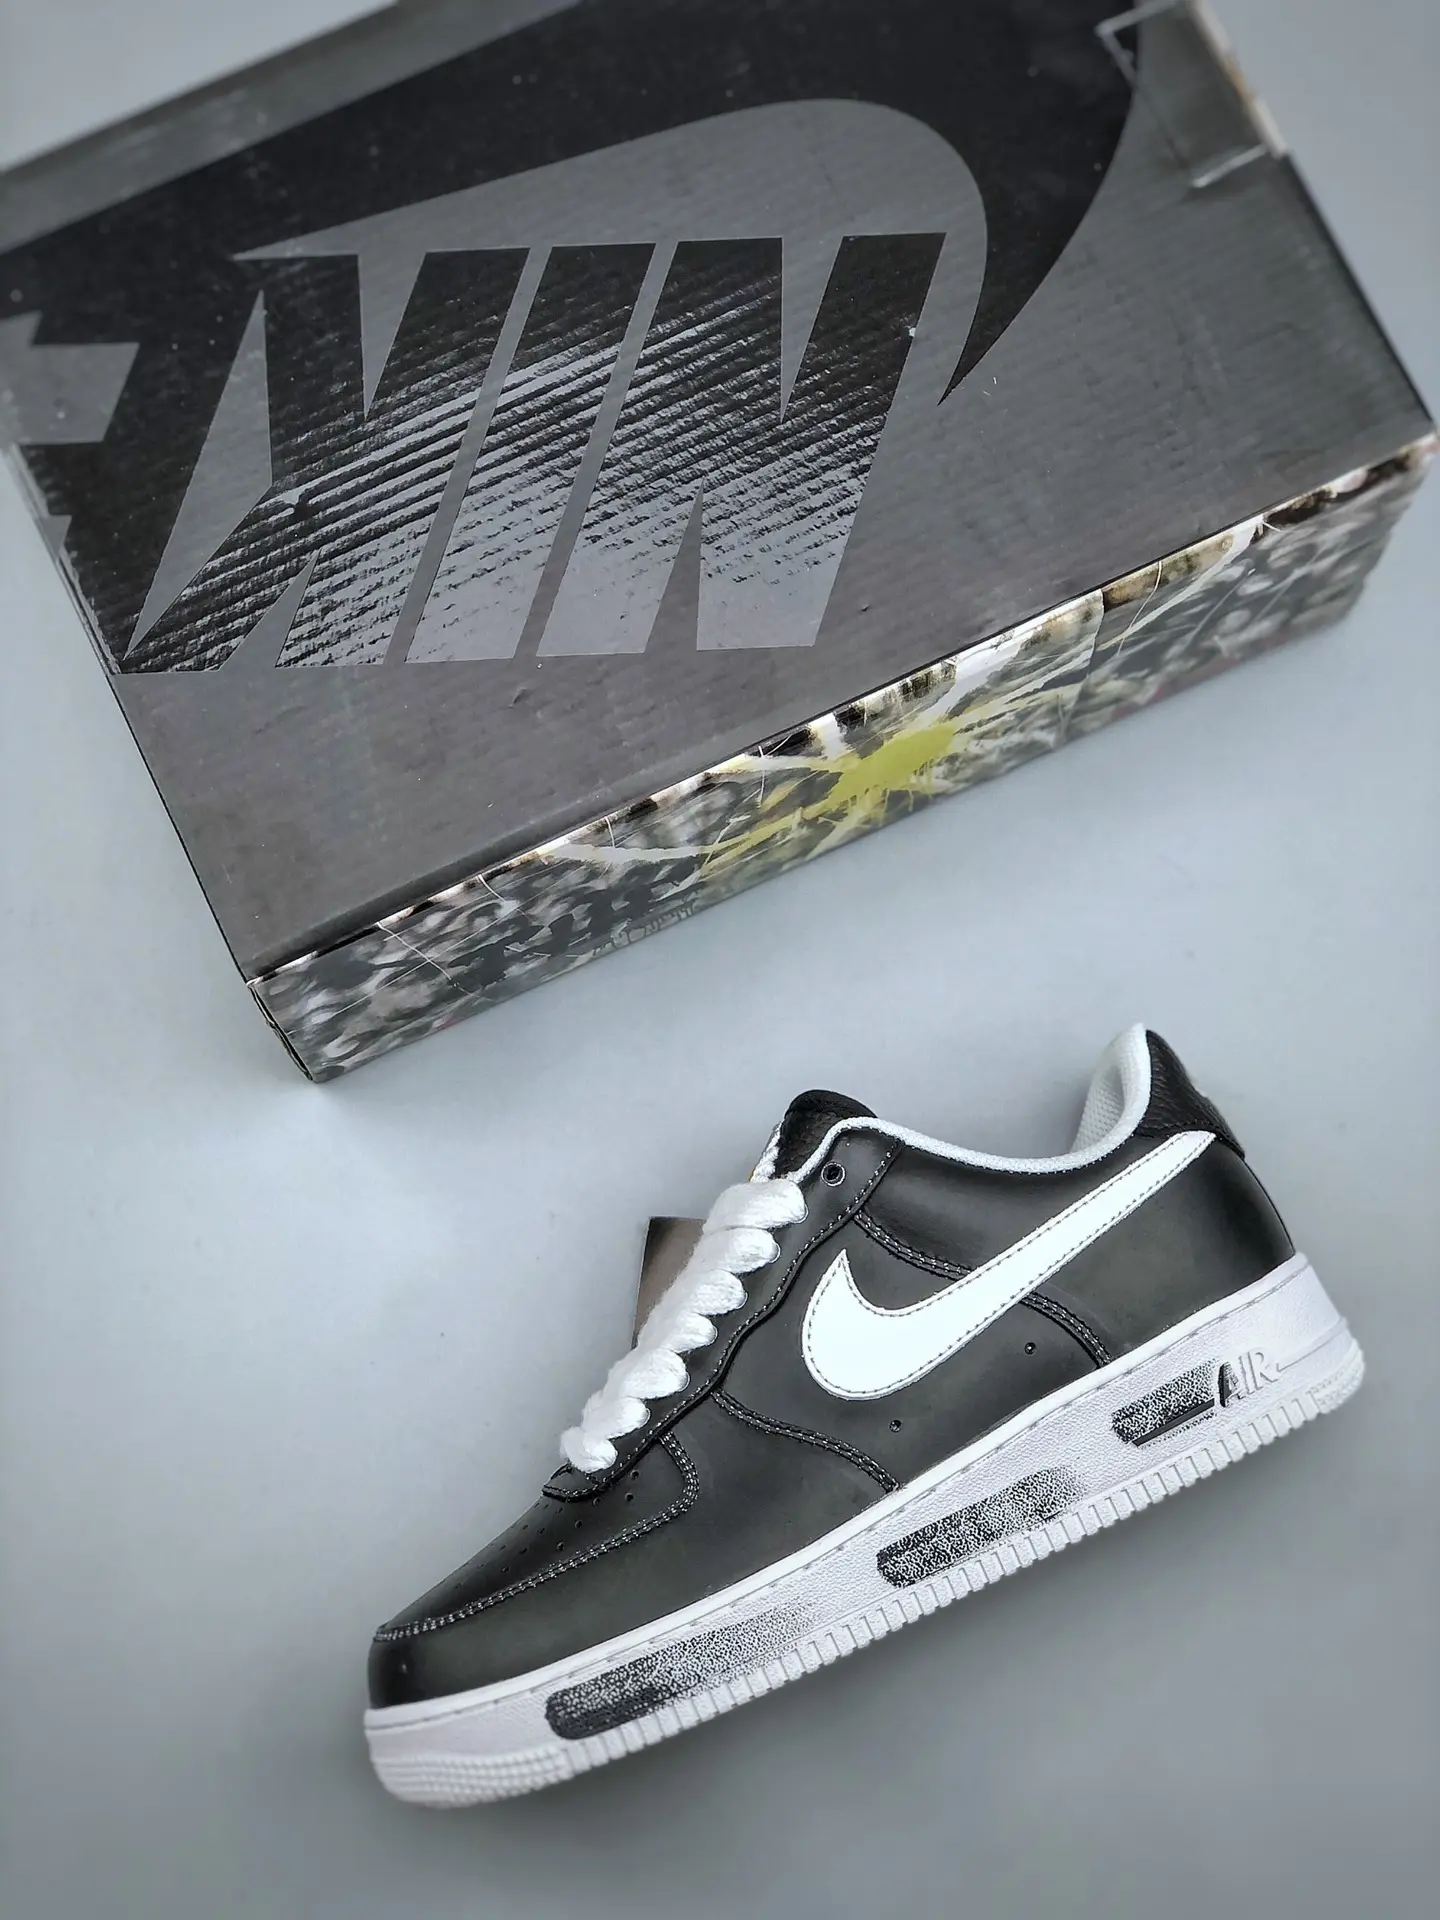 YASSW | Nike AIR FORCE 1 Unisex Street Style Collaboration G-Dragon Sneakers Review